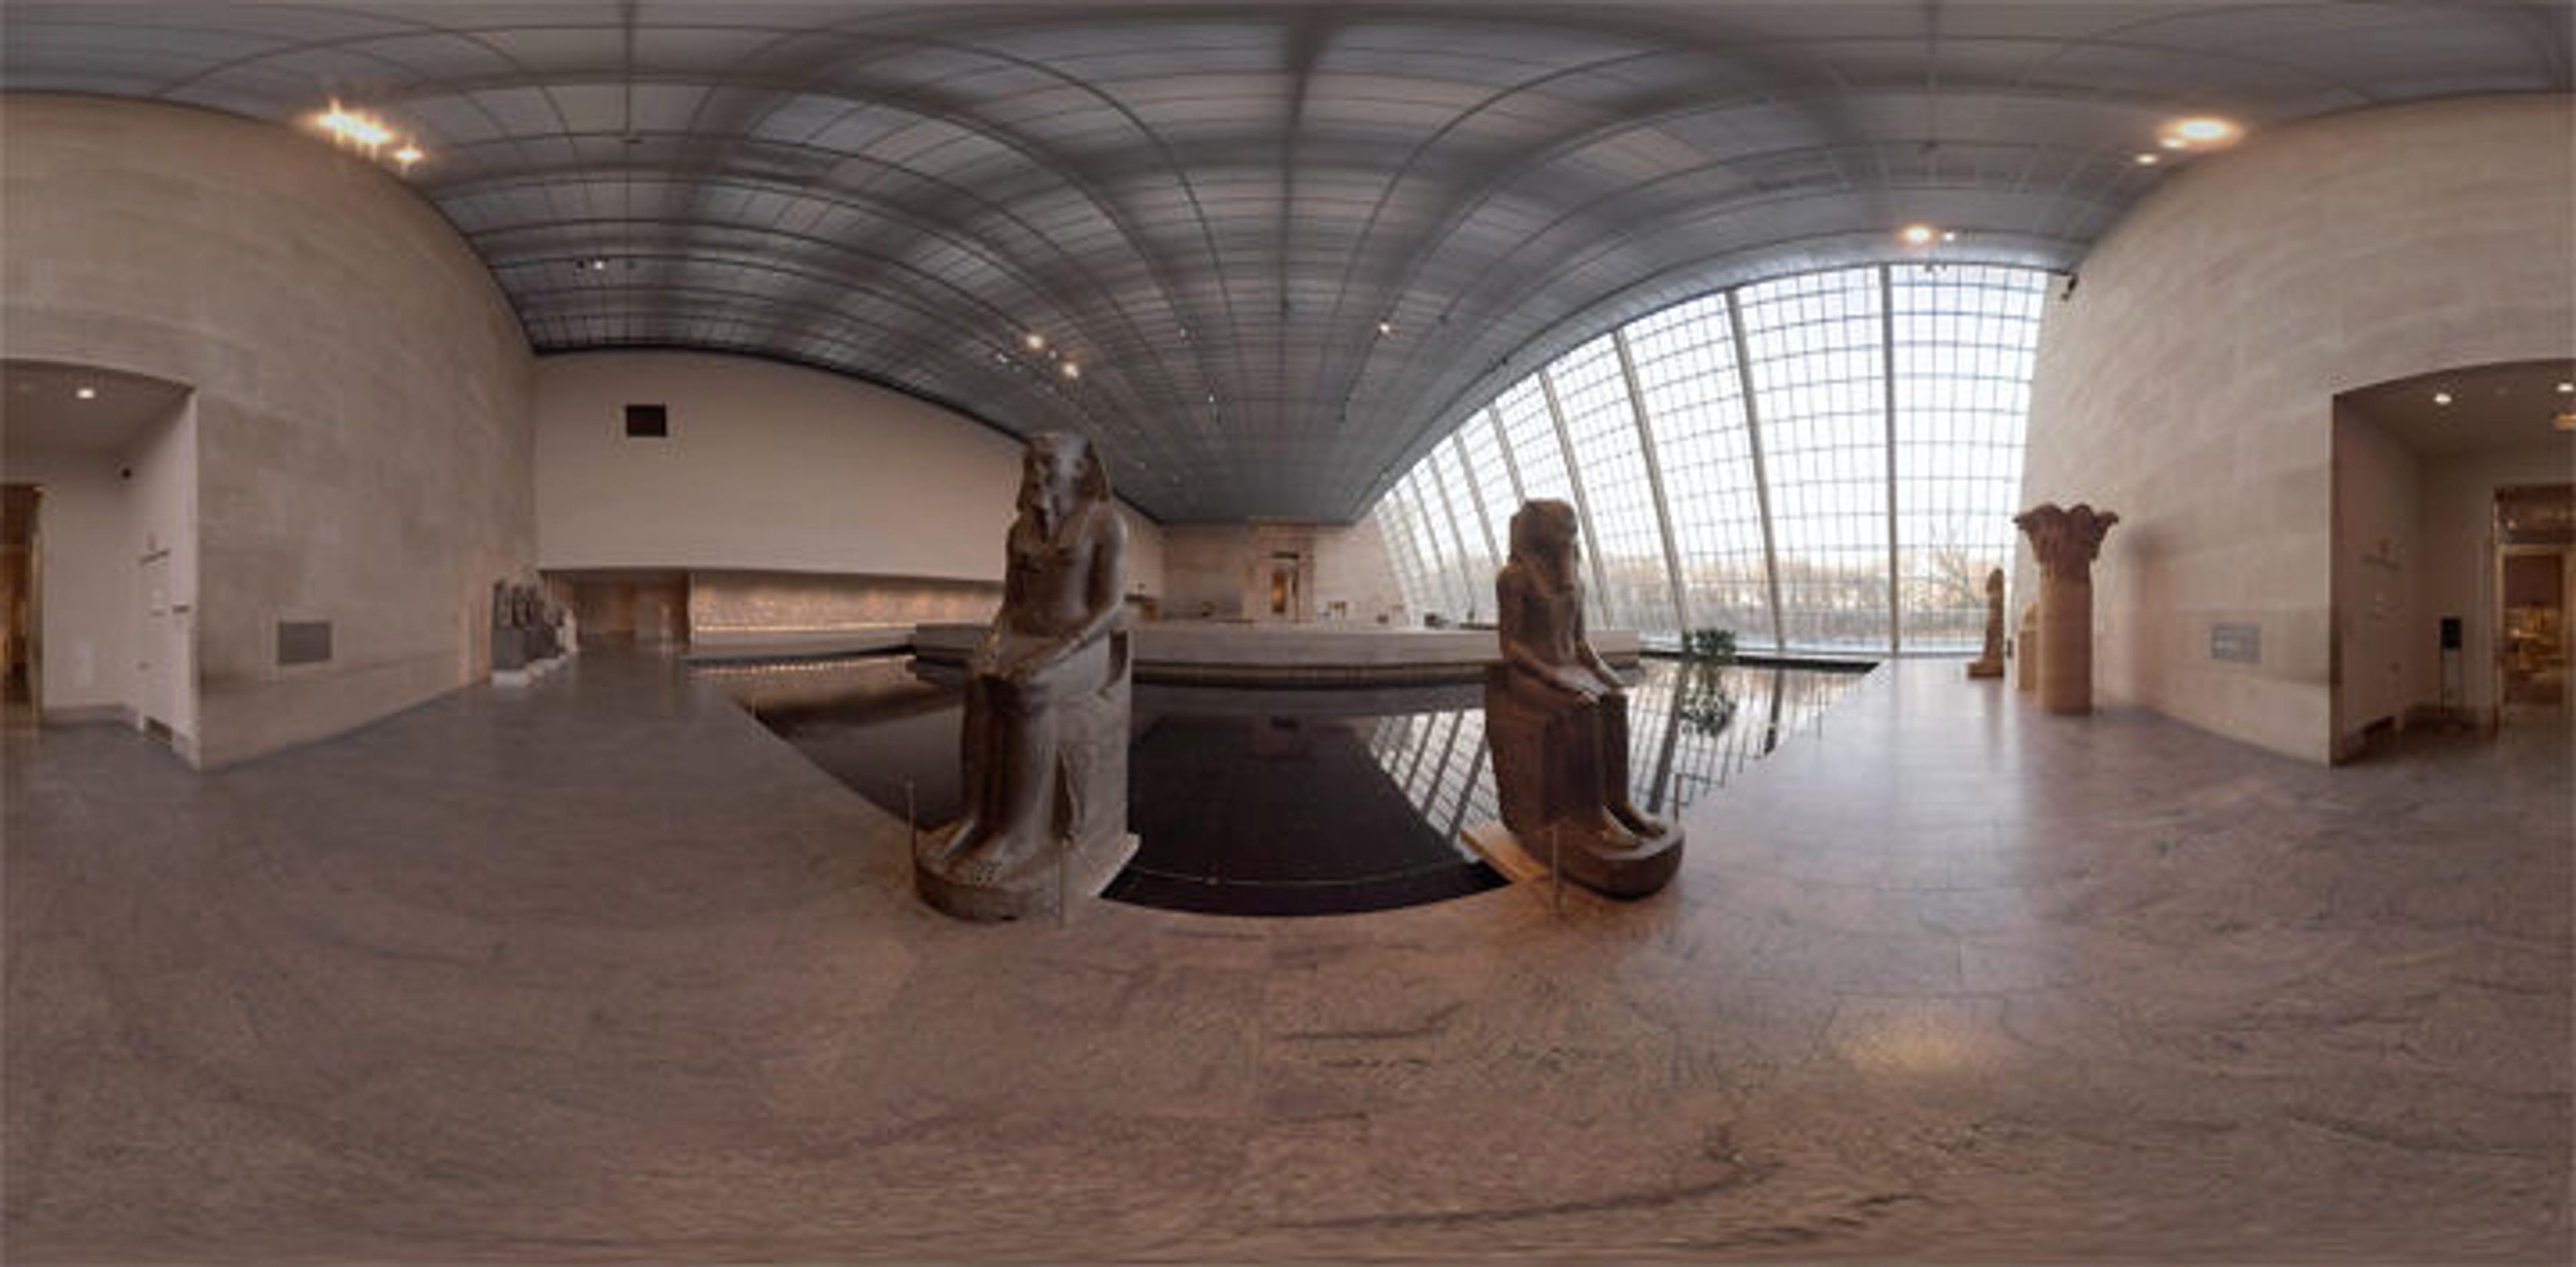 The Temple of Dendur in The Sackler Wing as seen in The Met's first Facebook 360° video